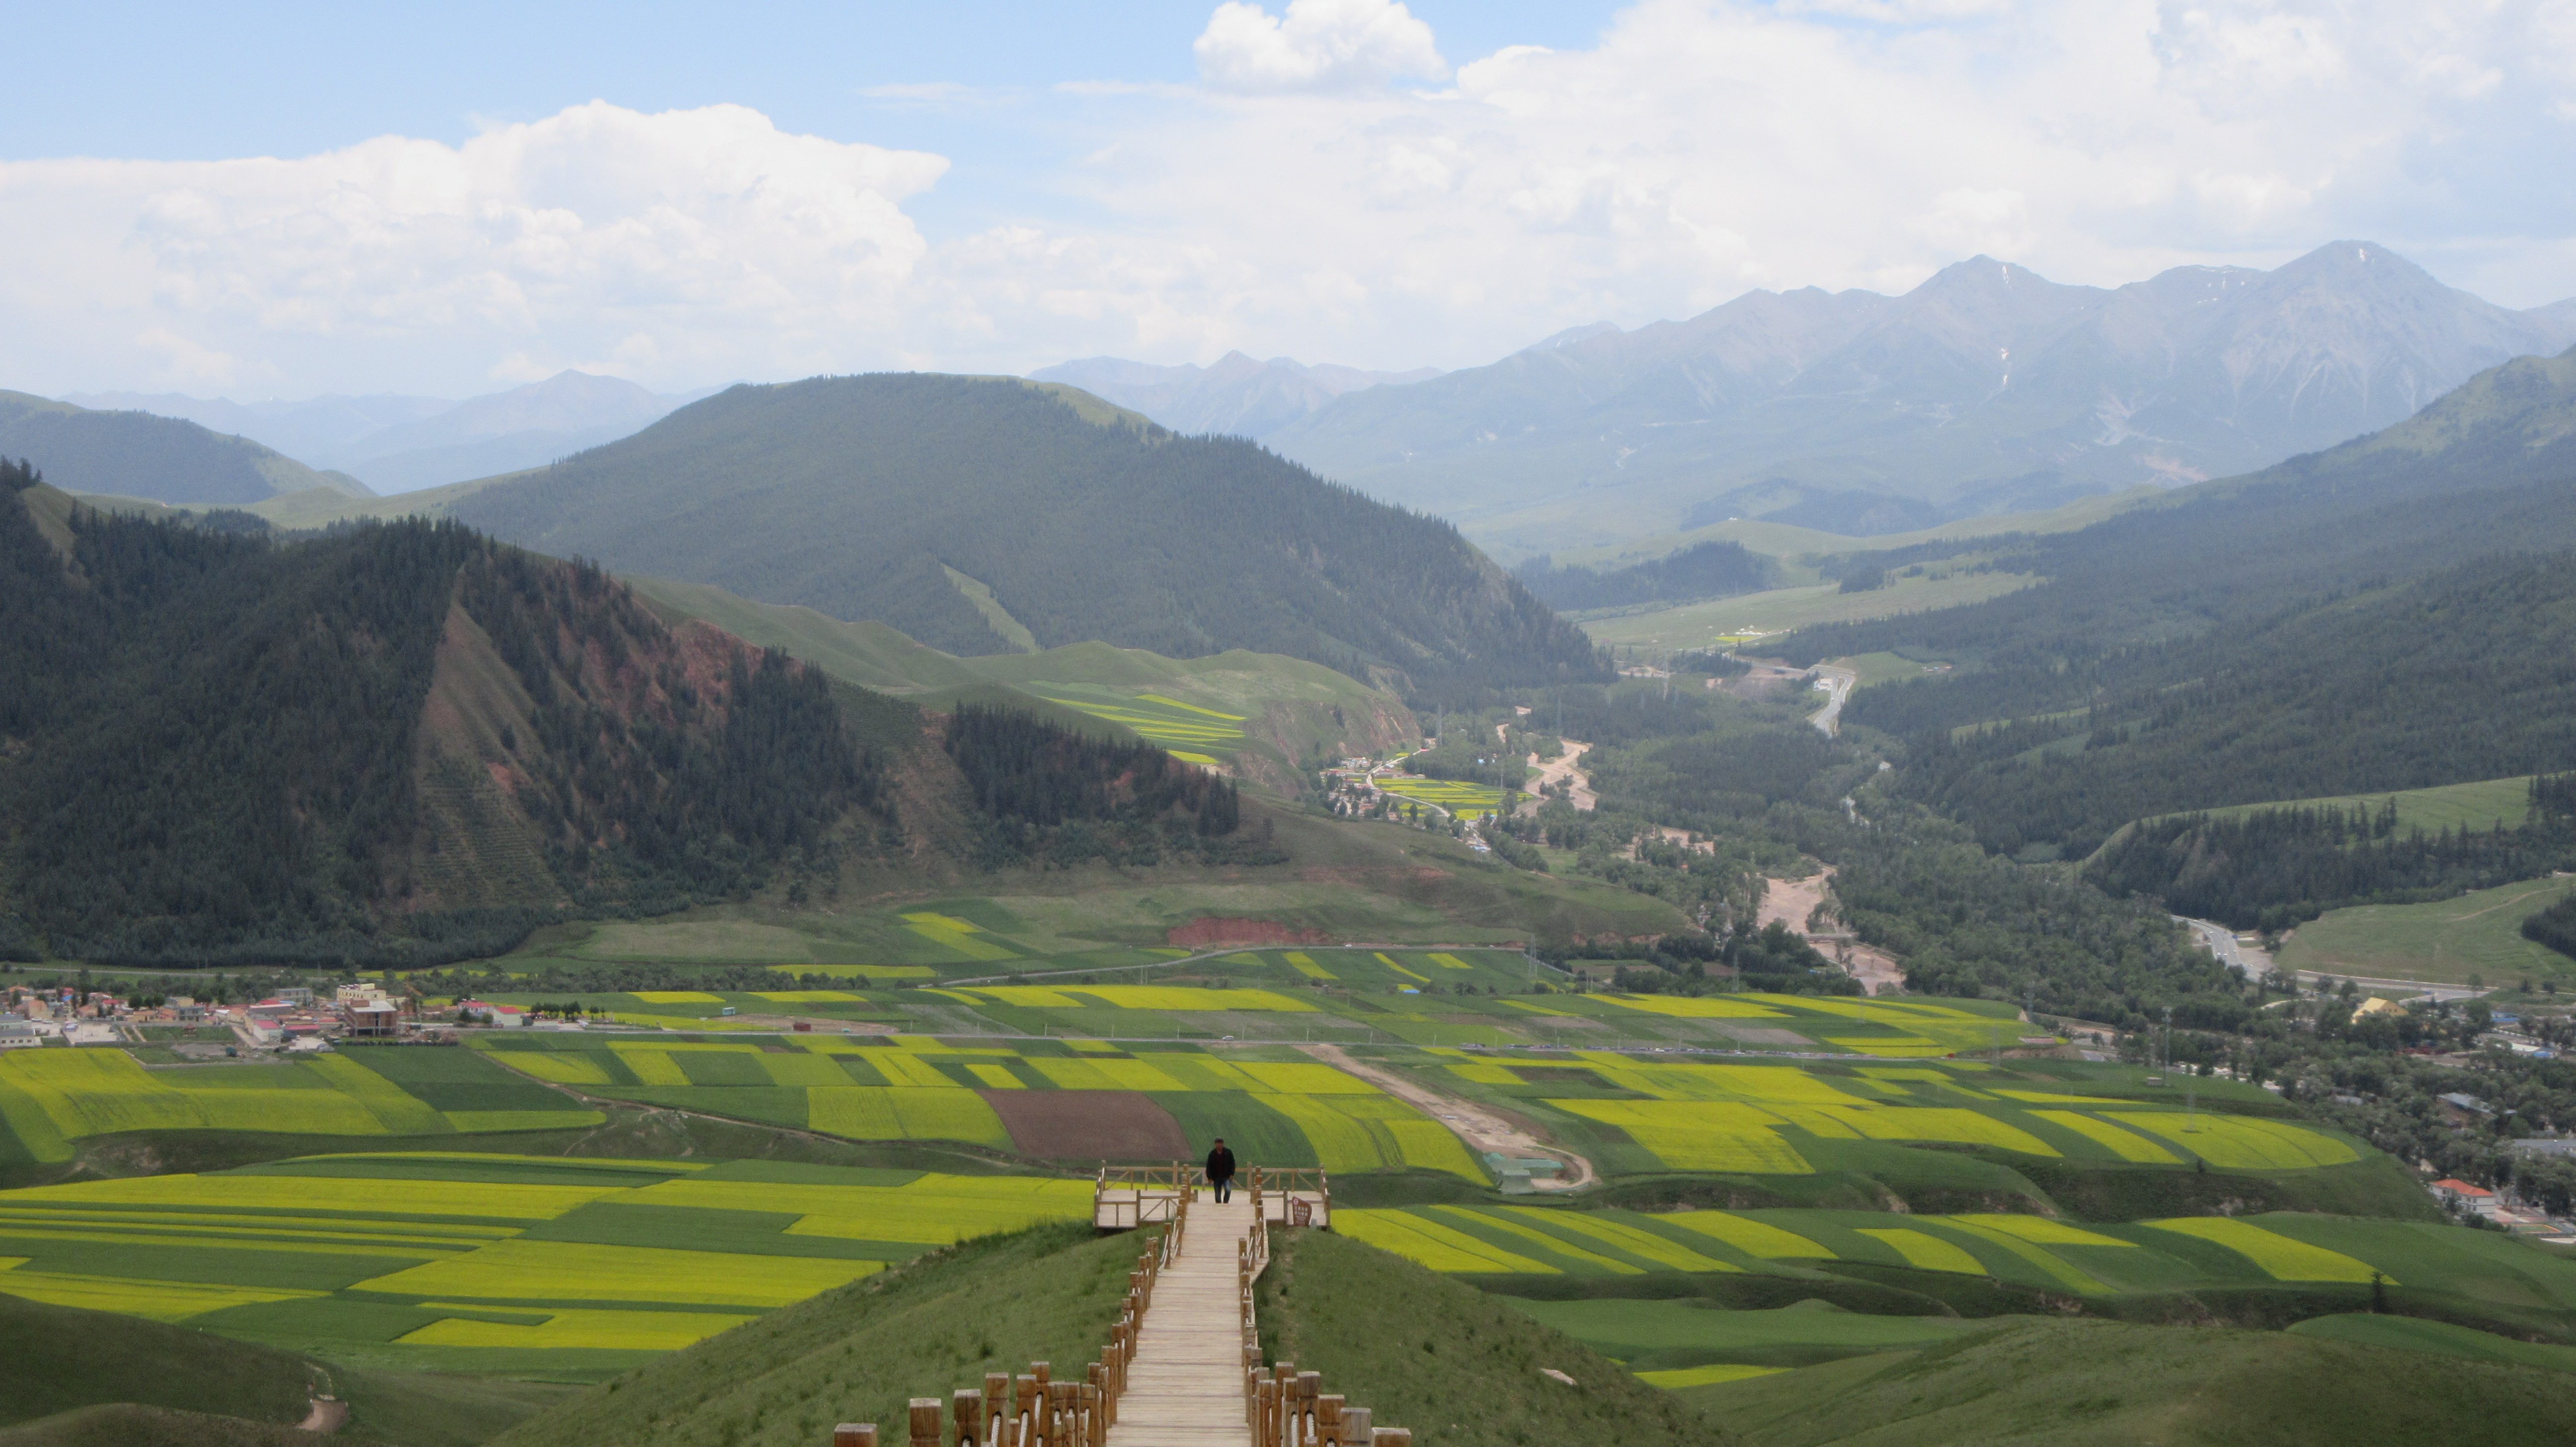 BIRD'S EYE VIEW. One of the viewing platforms in Zhuo'er Shan provide visitors with an overlooking view of the yellow rape flower fields below. 